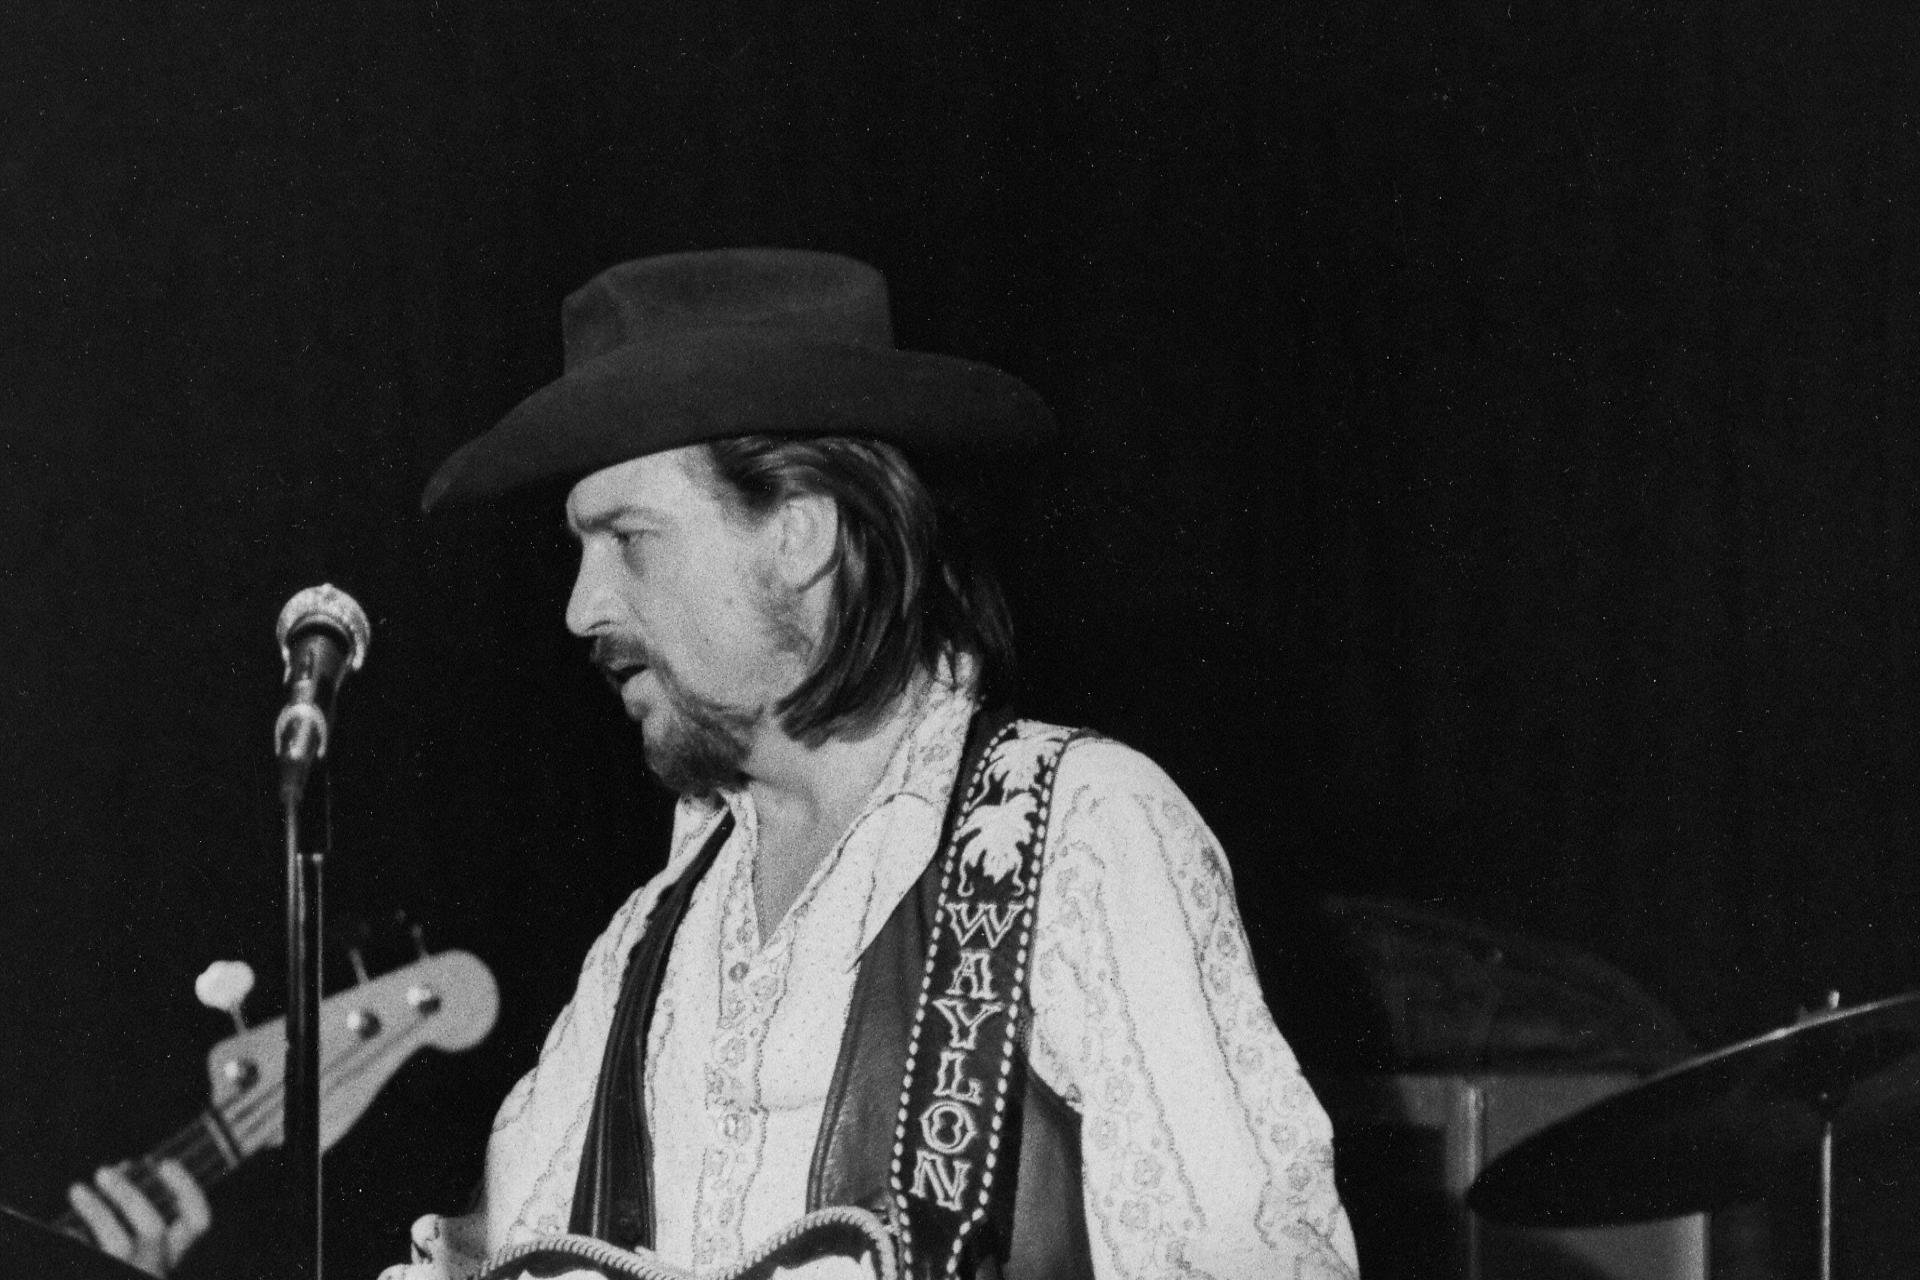 A Country Legends Last Waltz